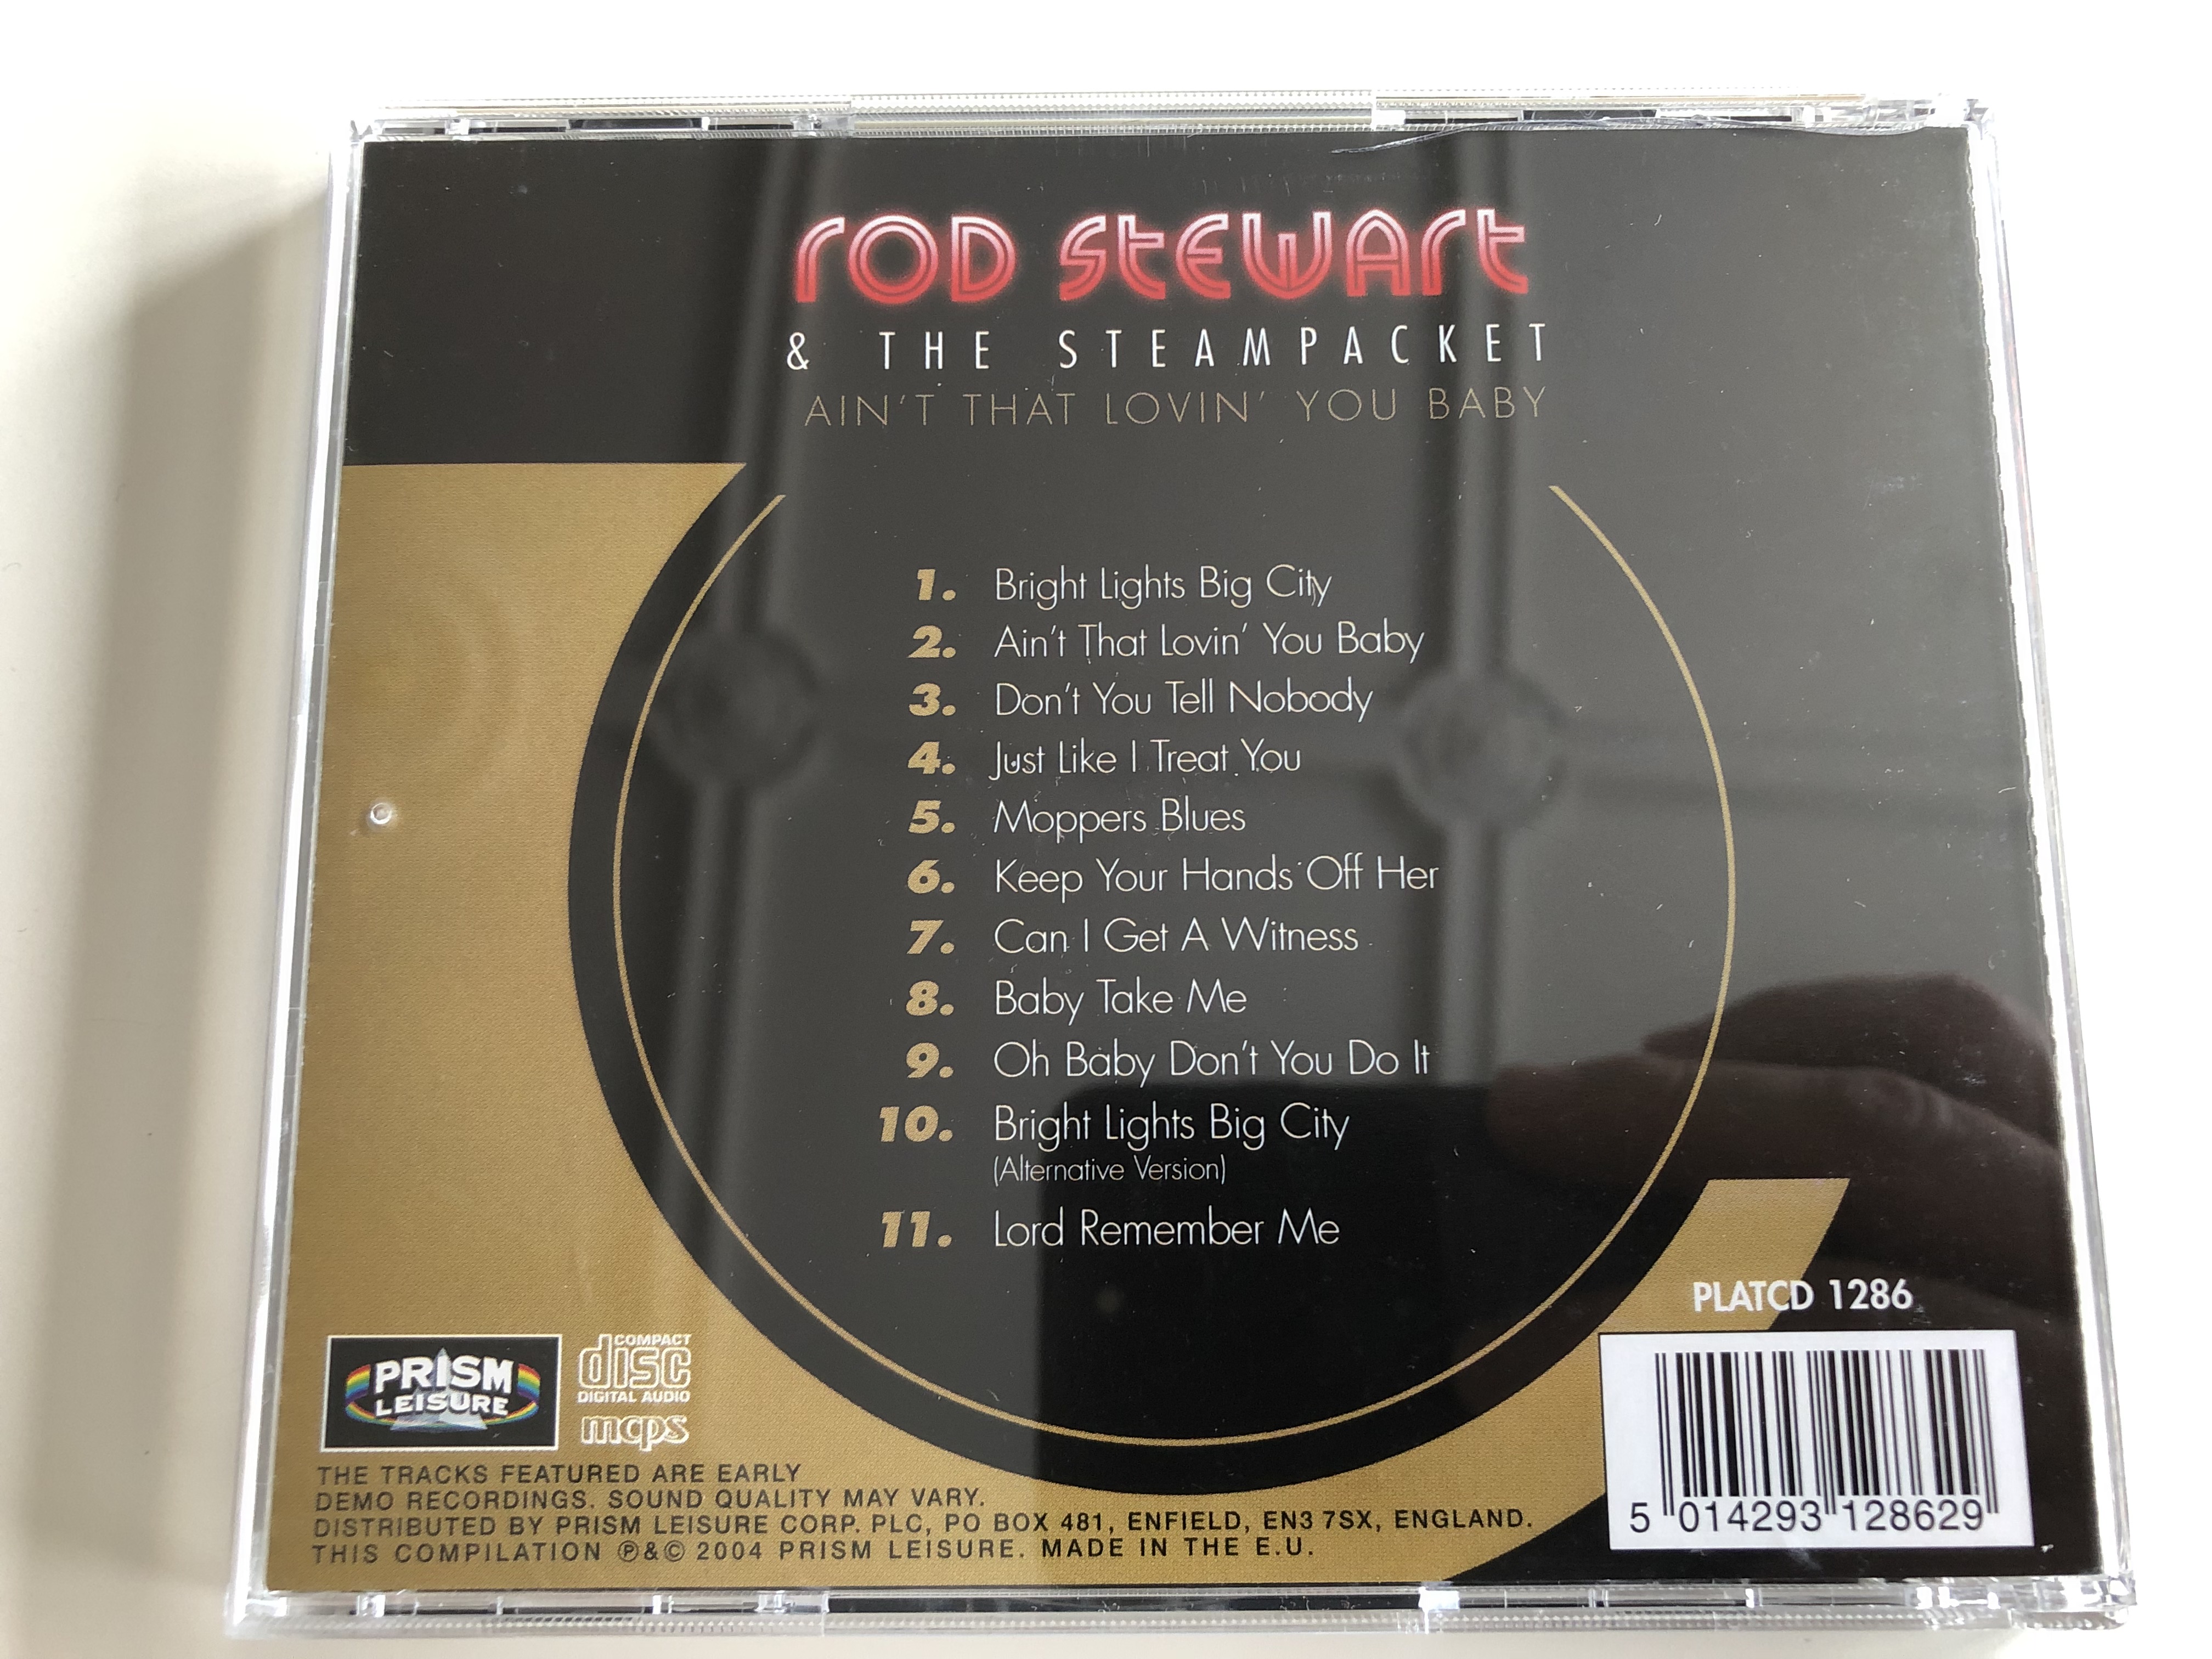 rod-stewart-the-steampacket-ain-t-that-lovin-you-baby-a-privileged-studio-view-of-the-singers-early-days-audio-cd-2004-platcd-1286-4-.jpg